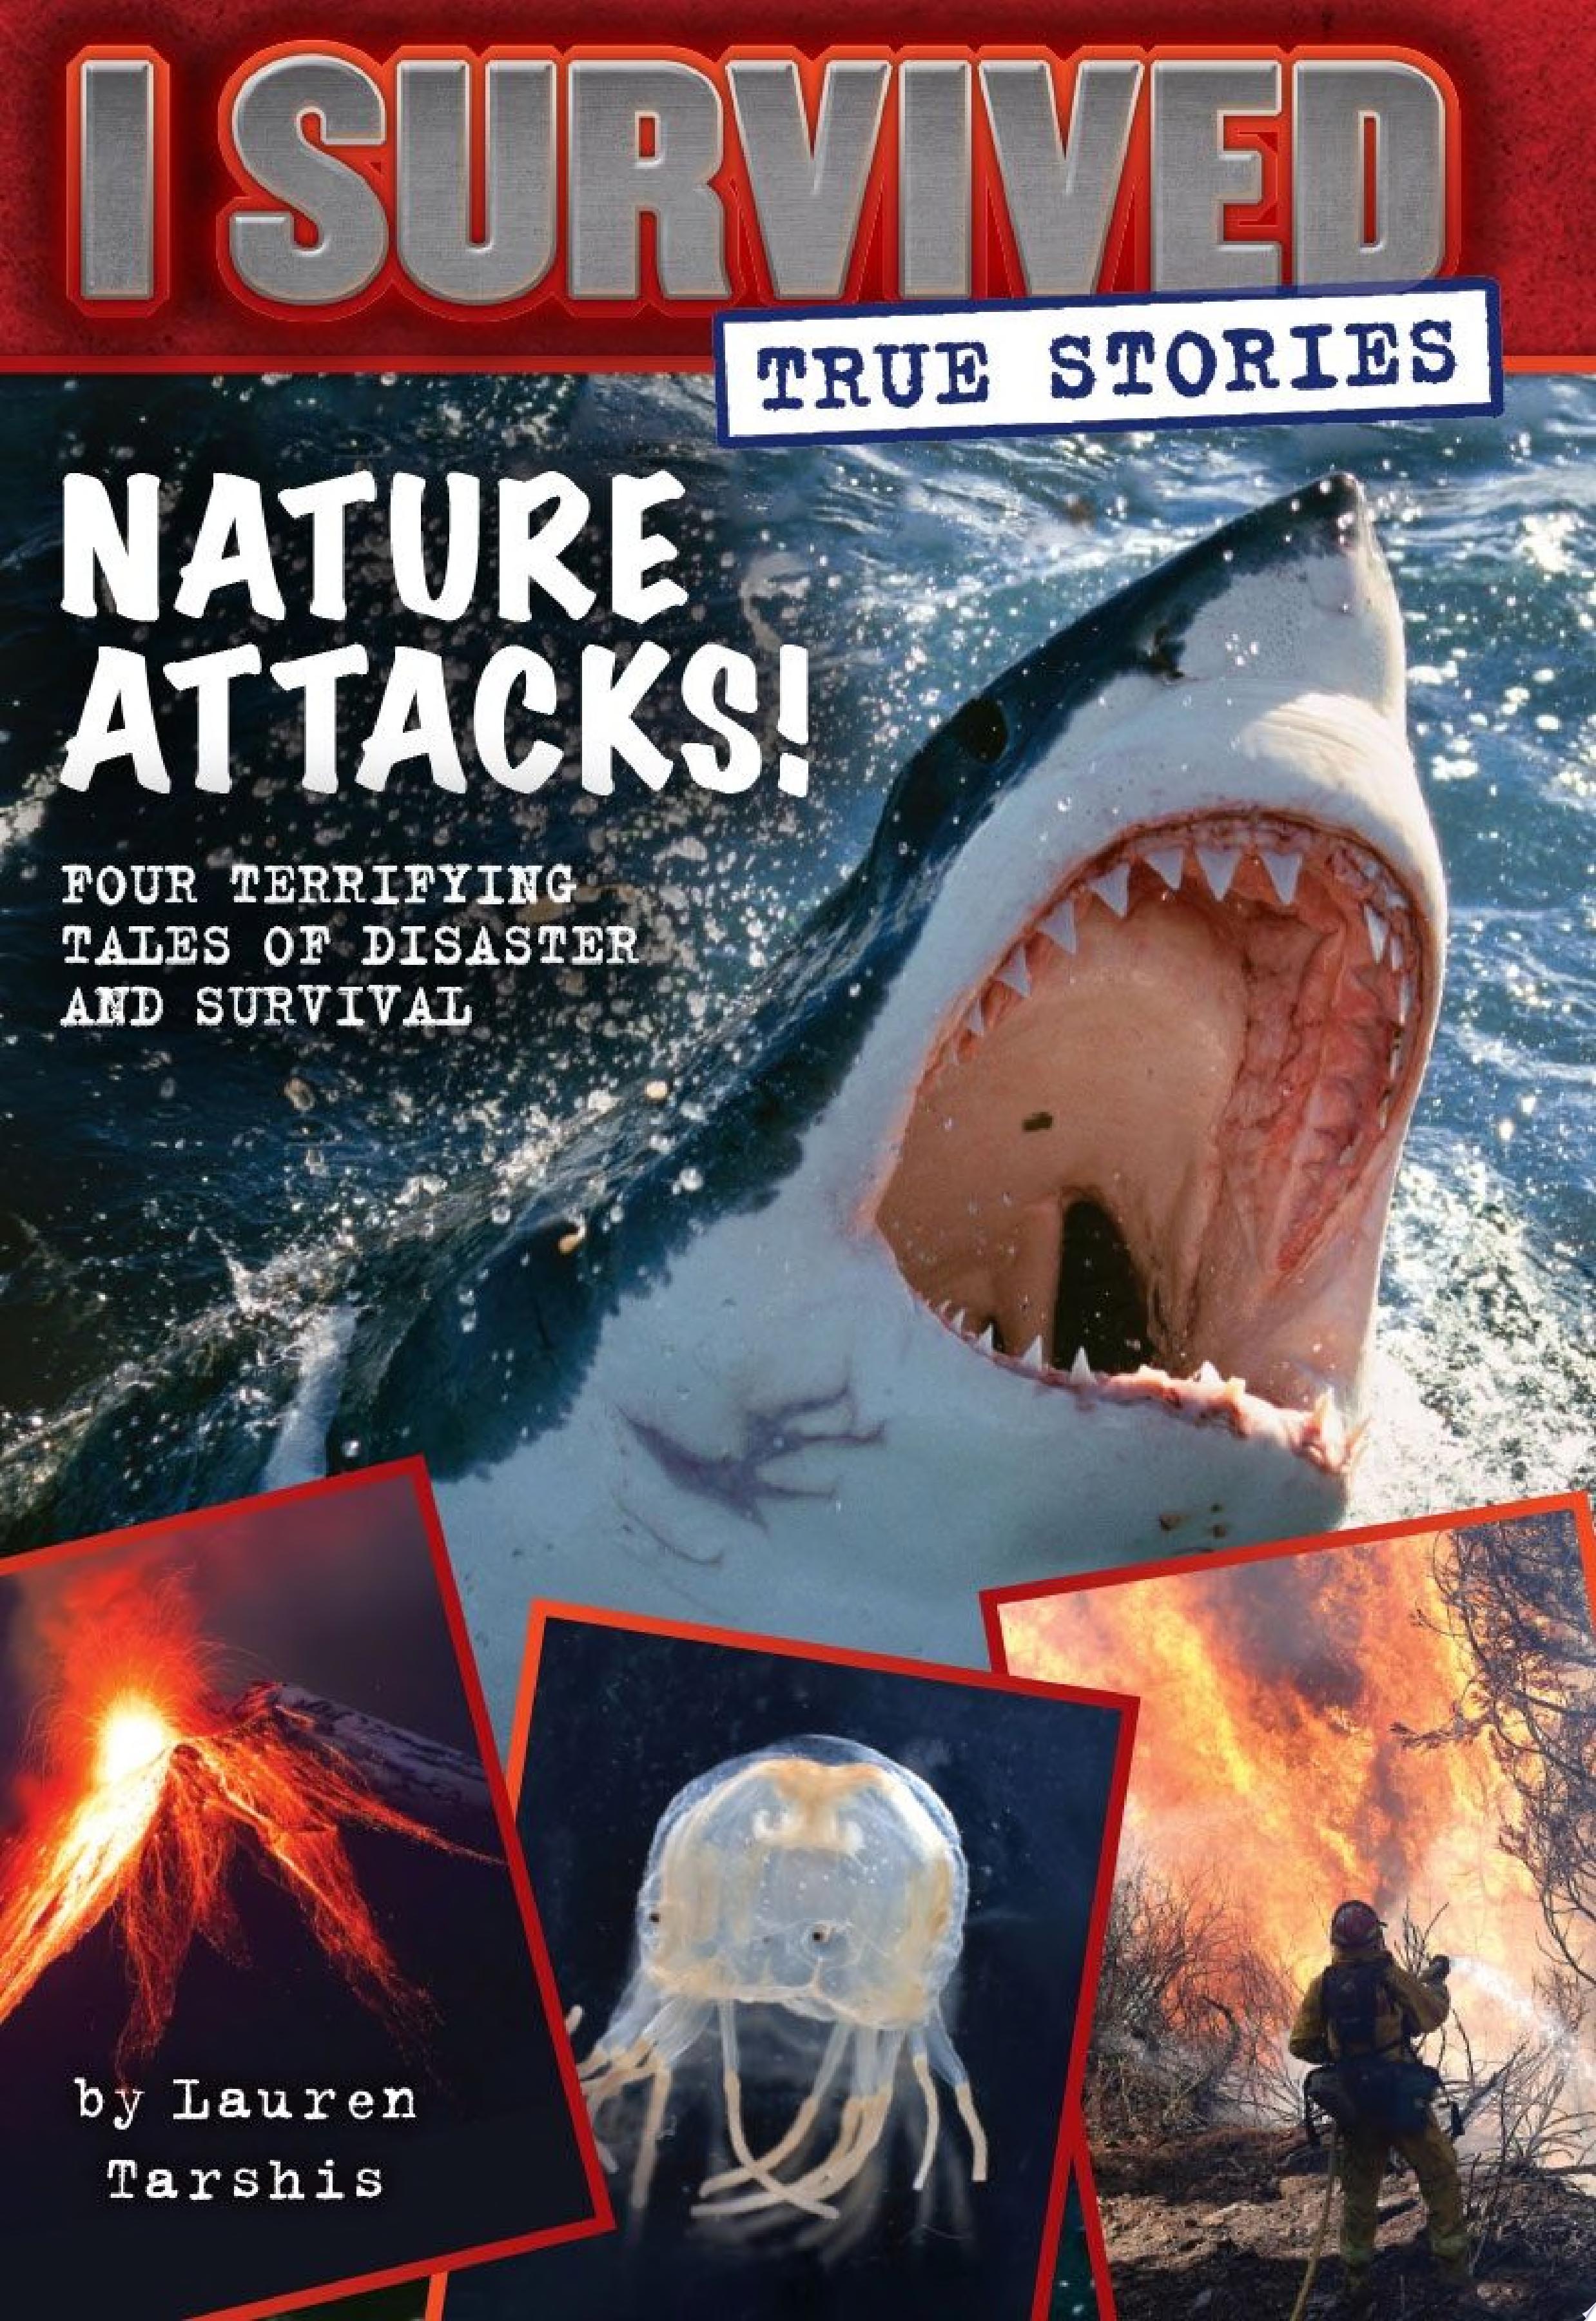 Image for "Nature Attacks! (I Survived True Stories #2)"